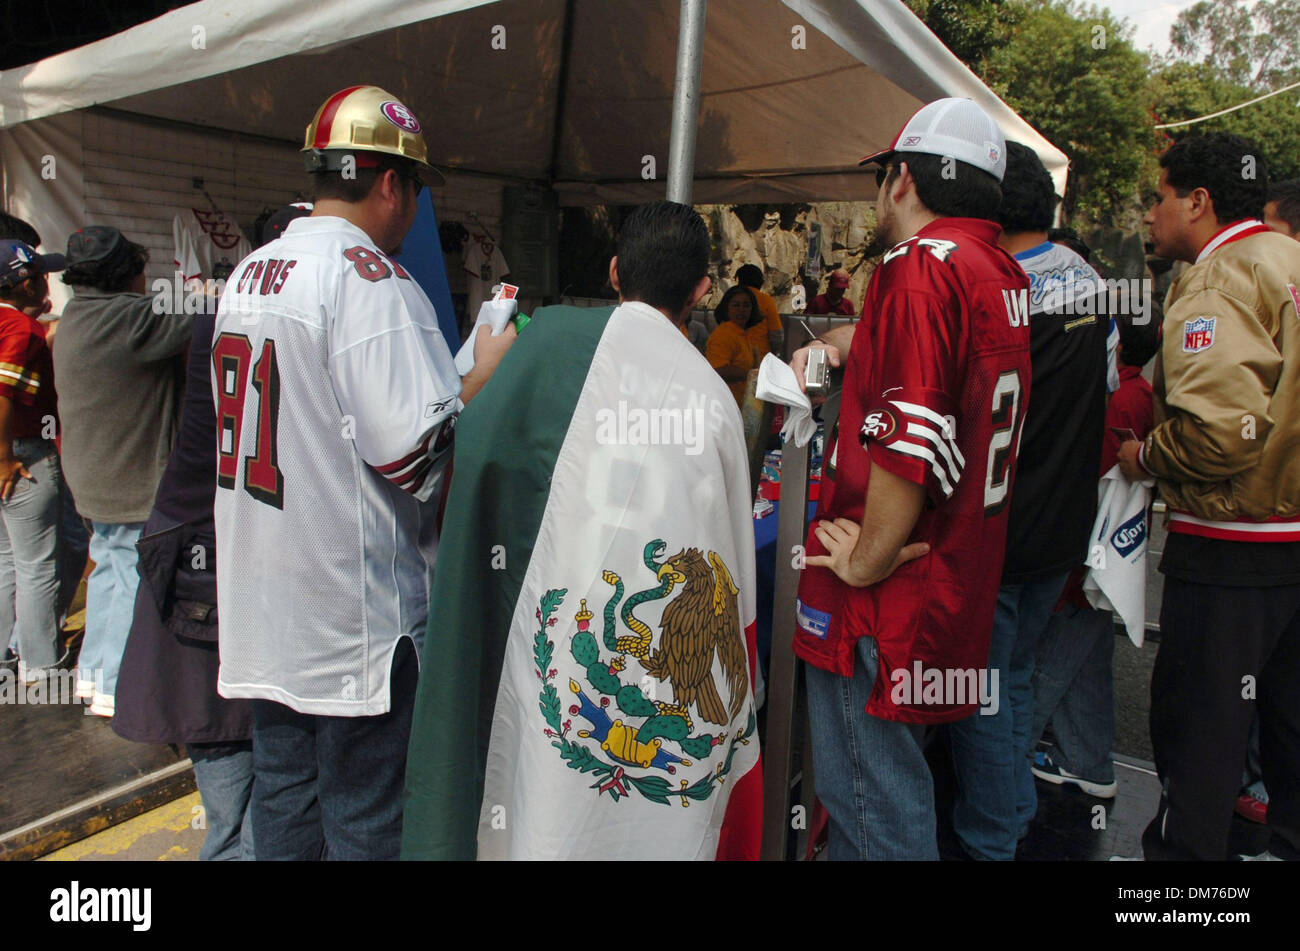 Oct 02, 2005; Mexico City, MEXICO; NFL FOOTBALL: Angel Sepulveda (cq-center-age 21), flanked by Jesus Guerra (cq-right age 21) and Cesar Balderas (cq-left age 23) all from Hadensburg, Texas look over souvenirs Sunday afternoon before the San Francisco 49ers and Arizona Cardinals play at Estadio Azteca in Mexico City. Mandatory Credit: Photo by Jose Luis Villegas/Sacramento Bee/ZUMA Stock Photo